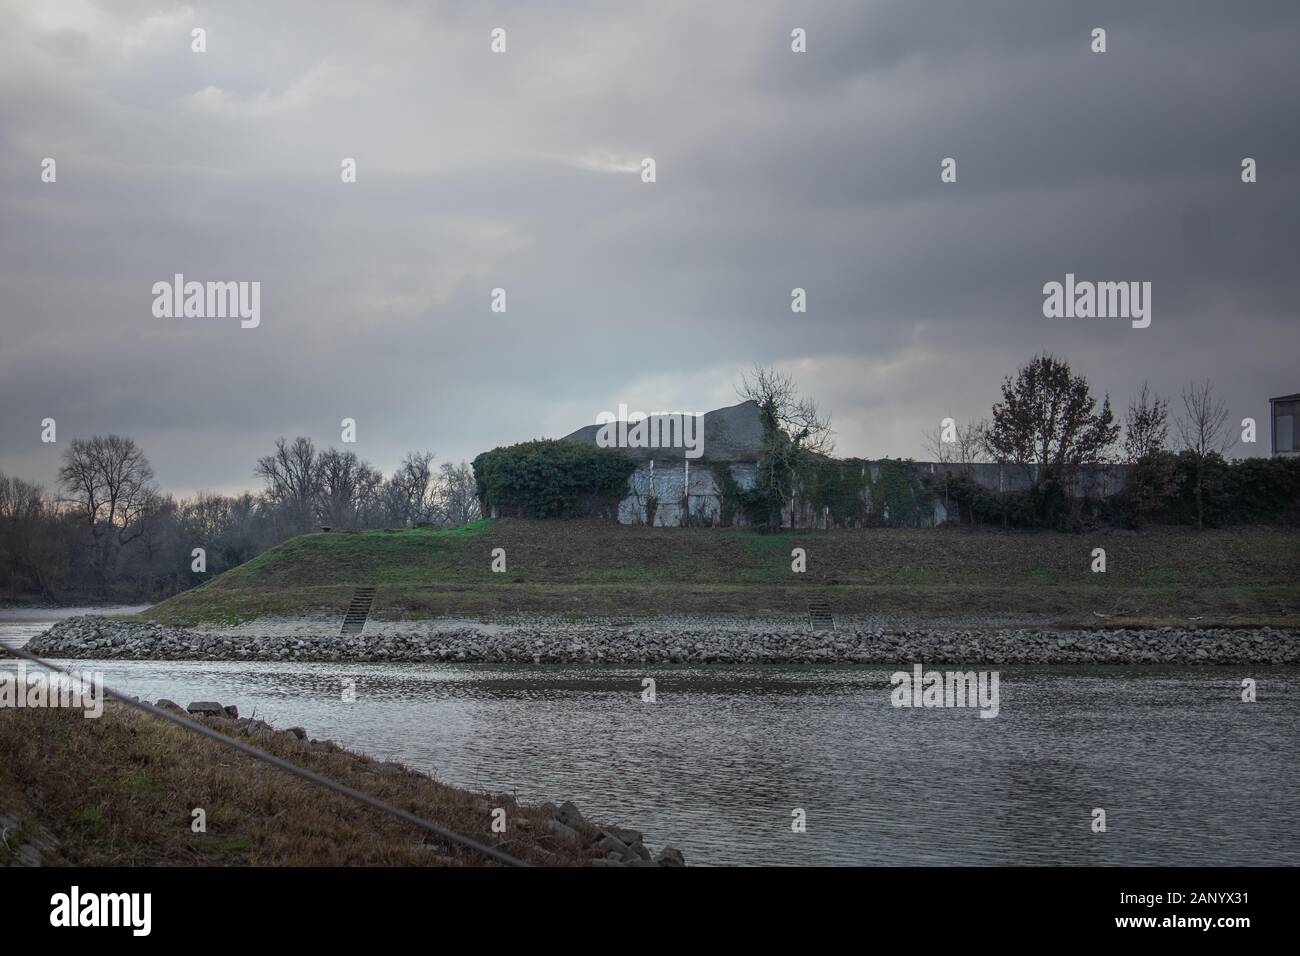 landscape at river banks on a cloudy day Stock Photo